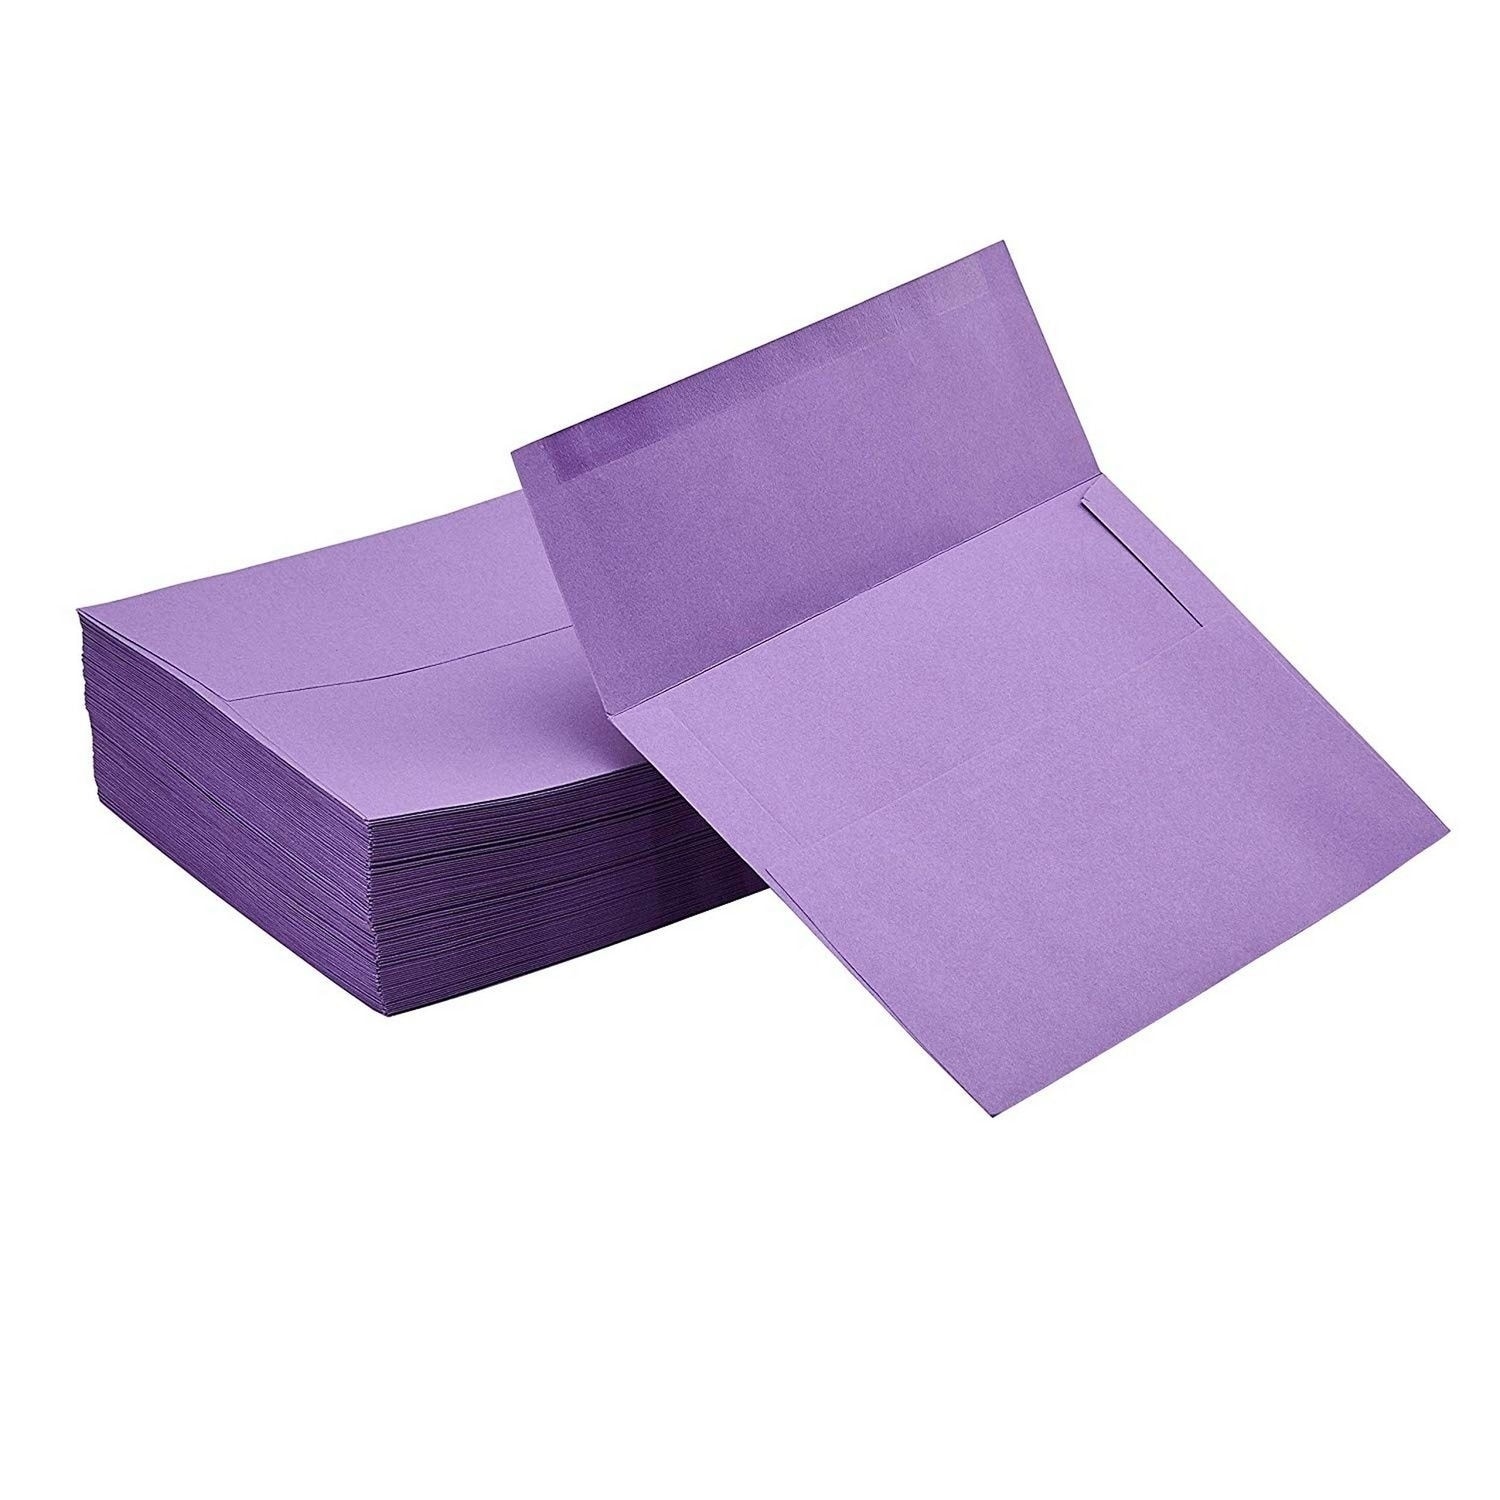 100-Pack A7 Envelopes, Party Invite Envelope, Purple, 5.25 x 7.25 inches